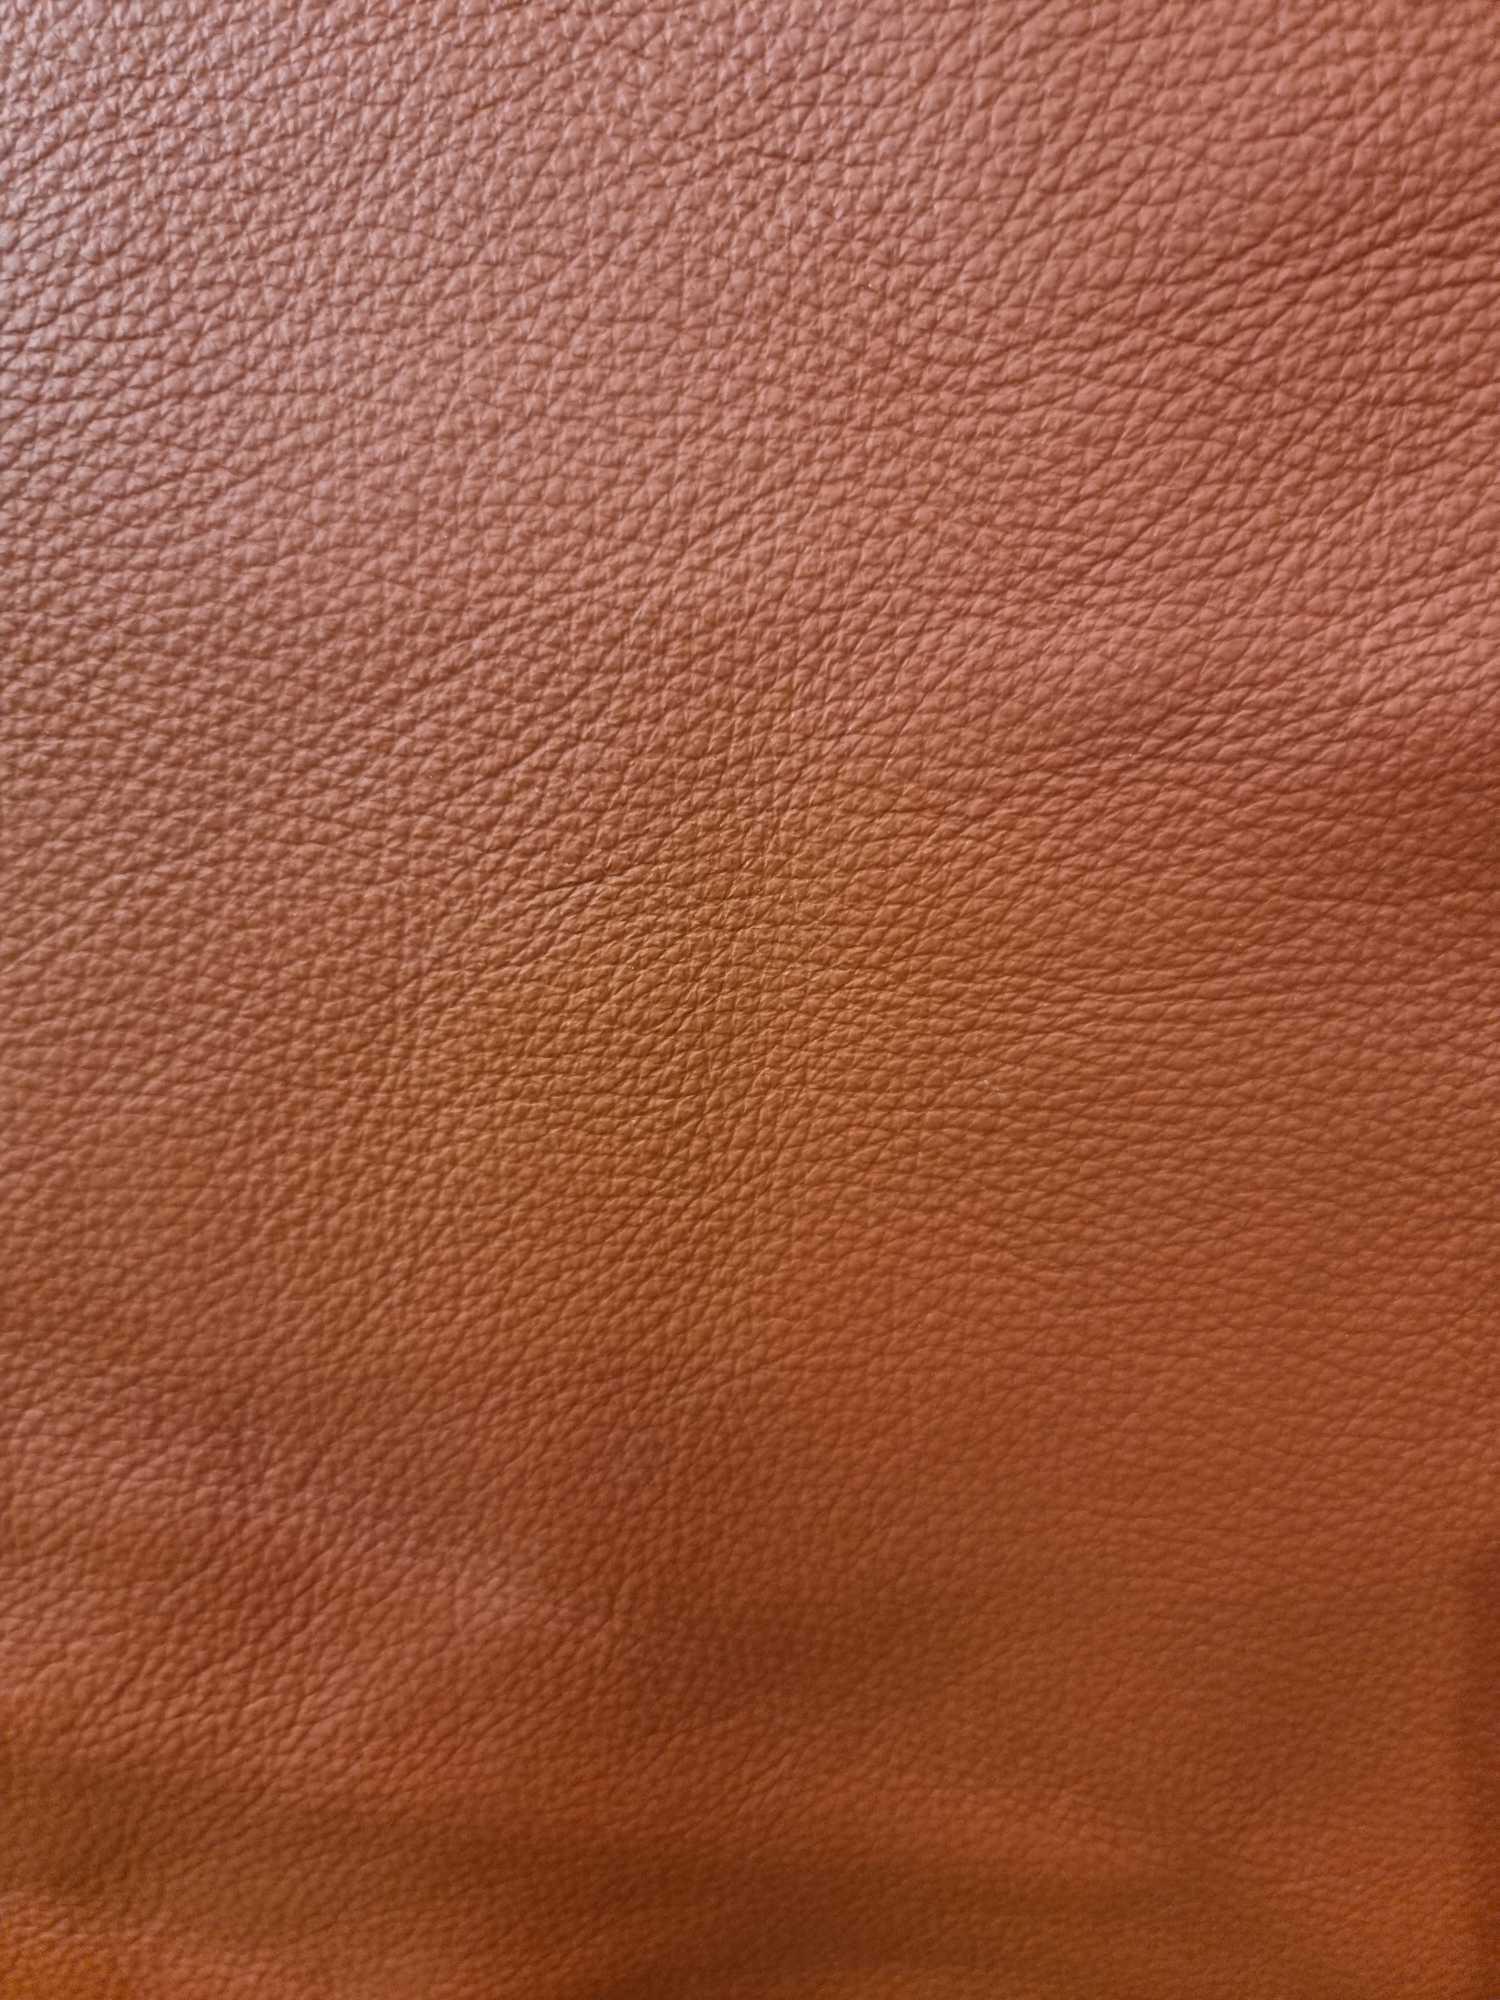 Contempo Red Orange Leather Hide approximately 4.4mÂ² 2.2 x 2cm - Image 2 of 3